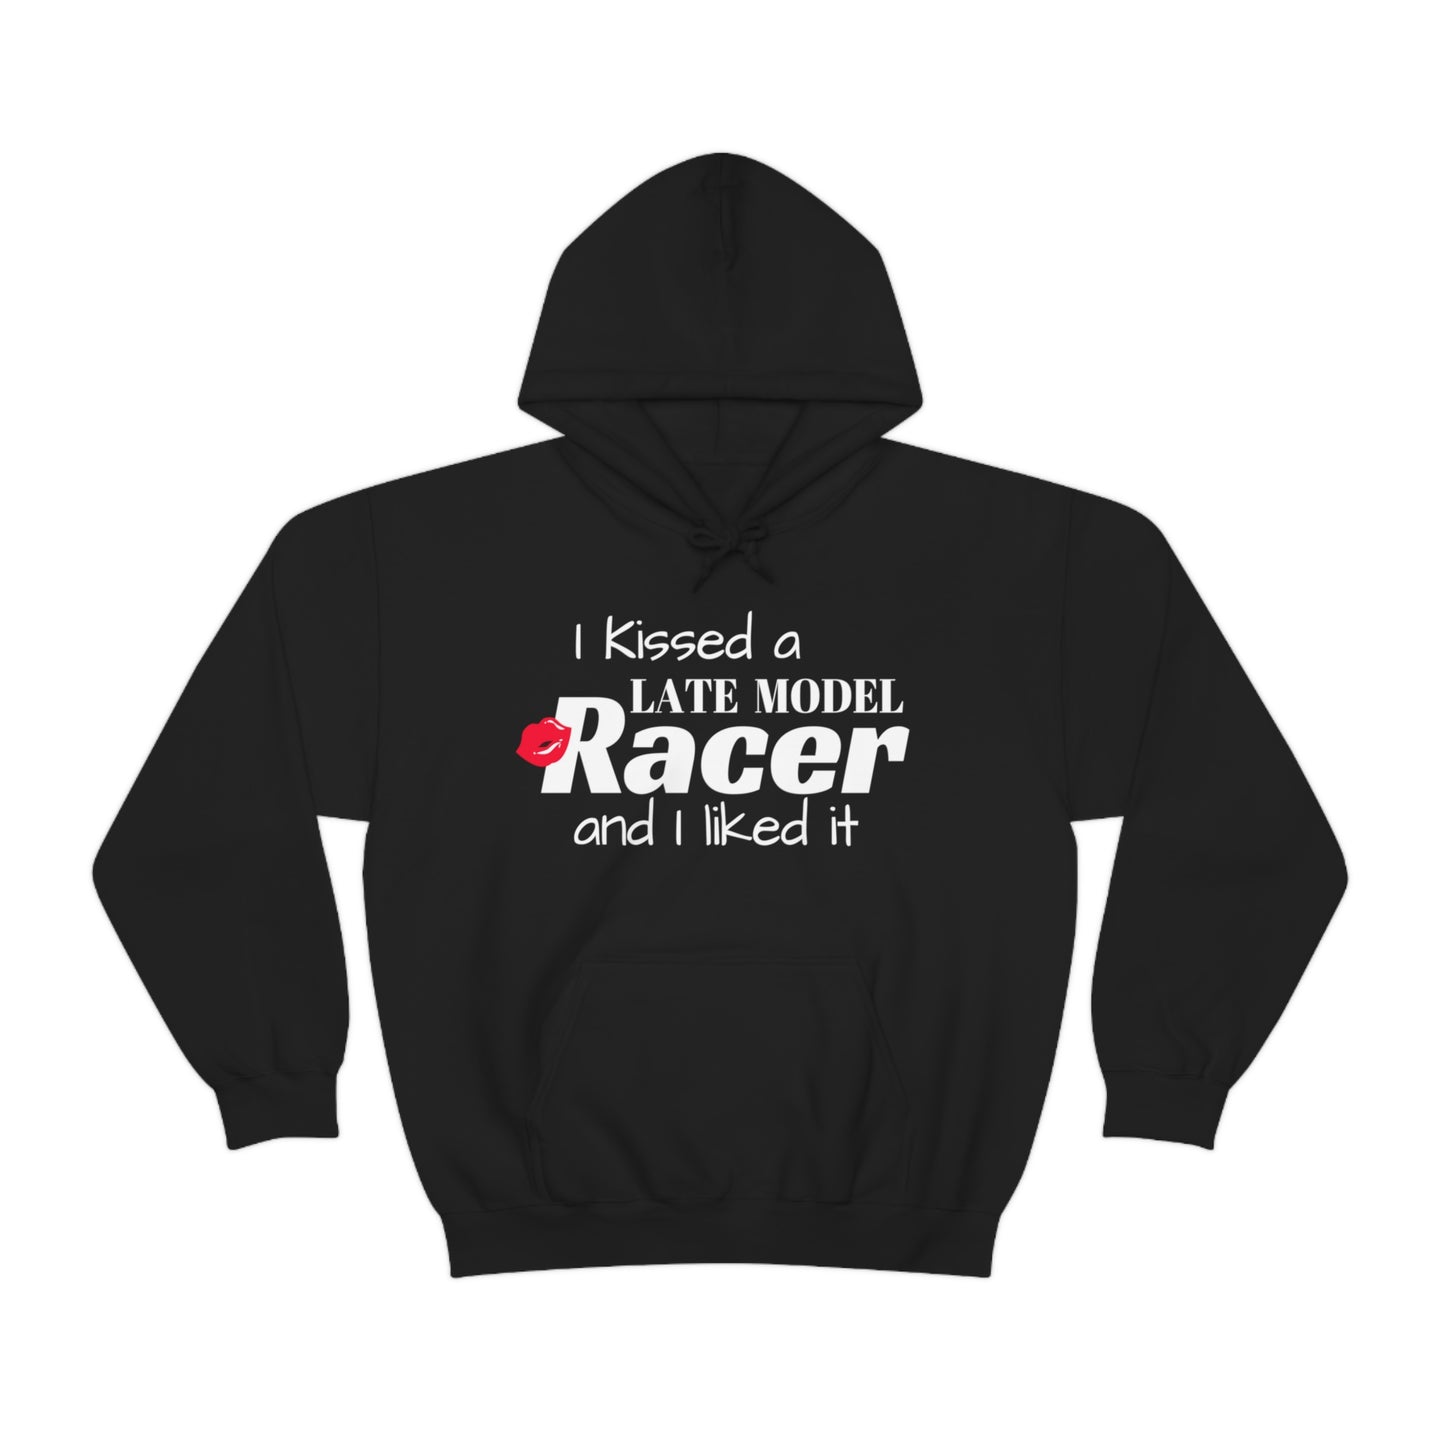 I Kissed A Late Model Racer And I Liked It Hooded Sweatshirt